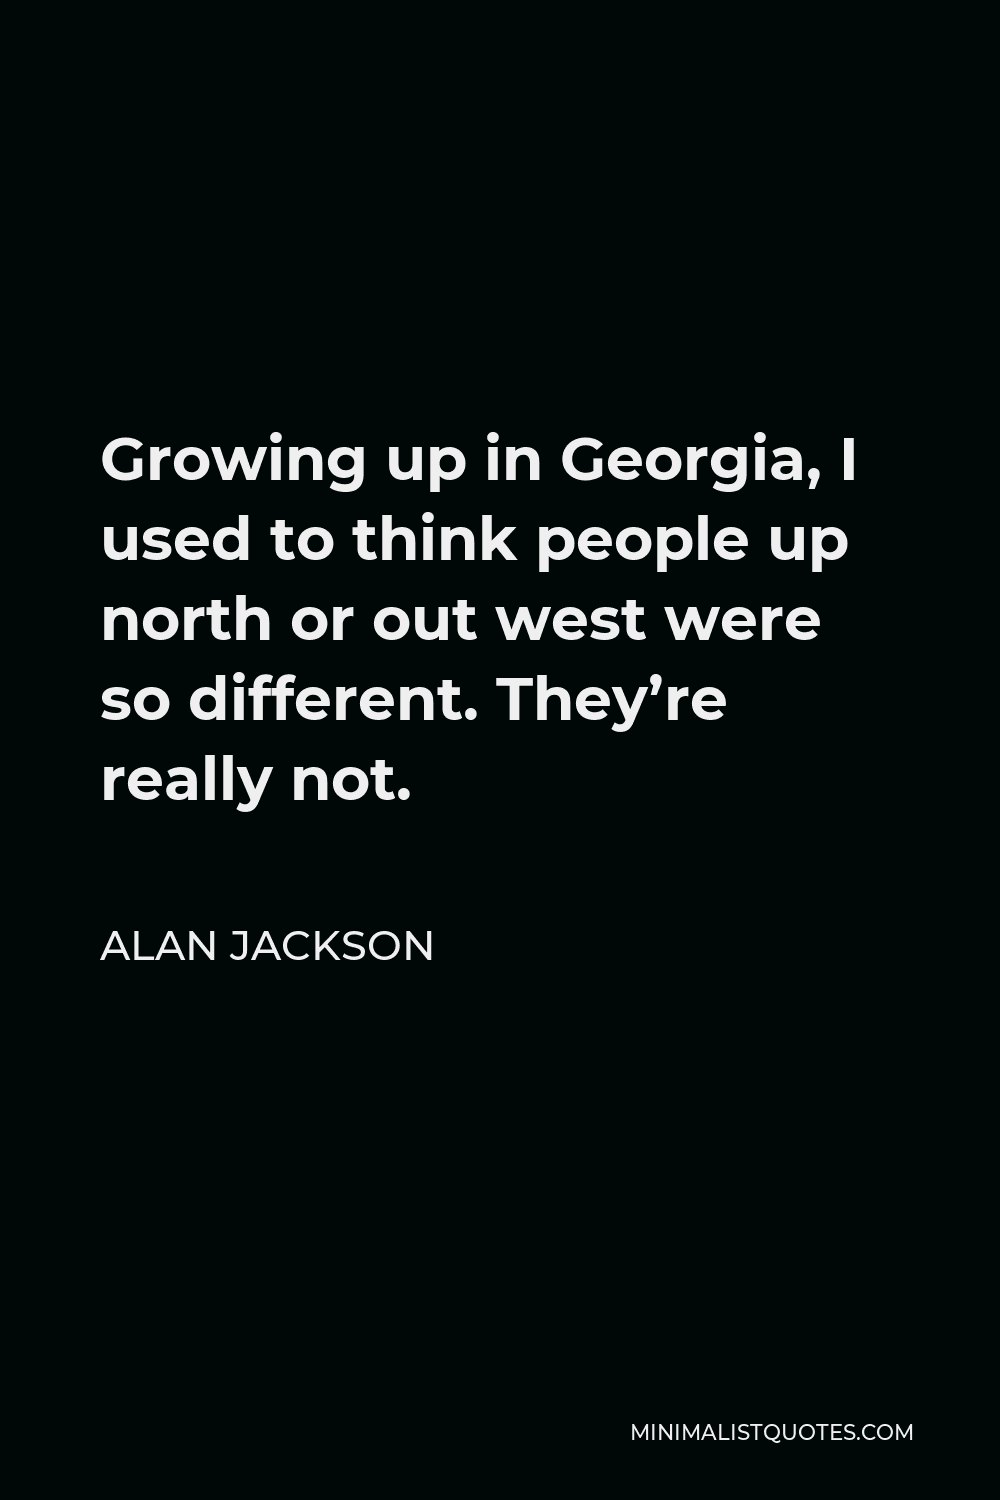 Alan Jackson Quote - Growing up in Georgia, I used to think people up north or out west were so different. They’re really not.